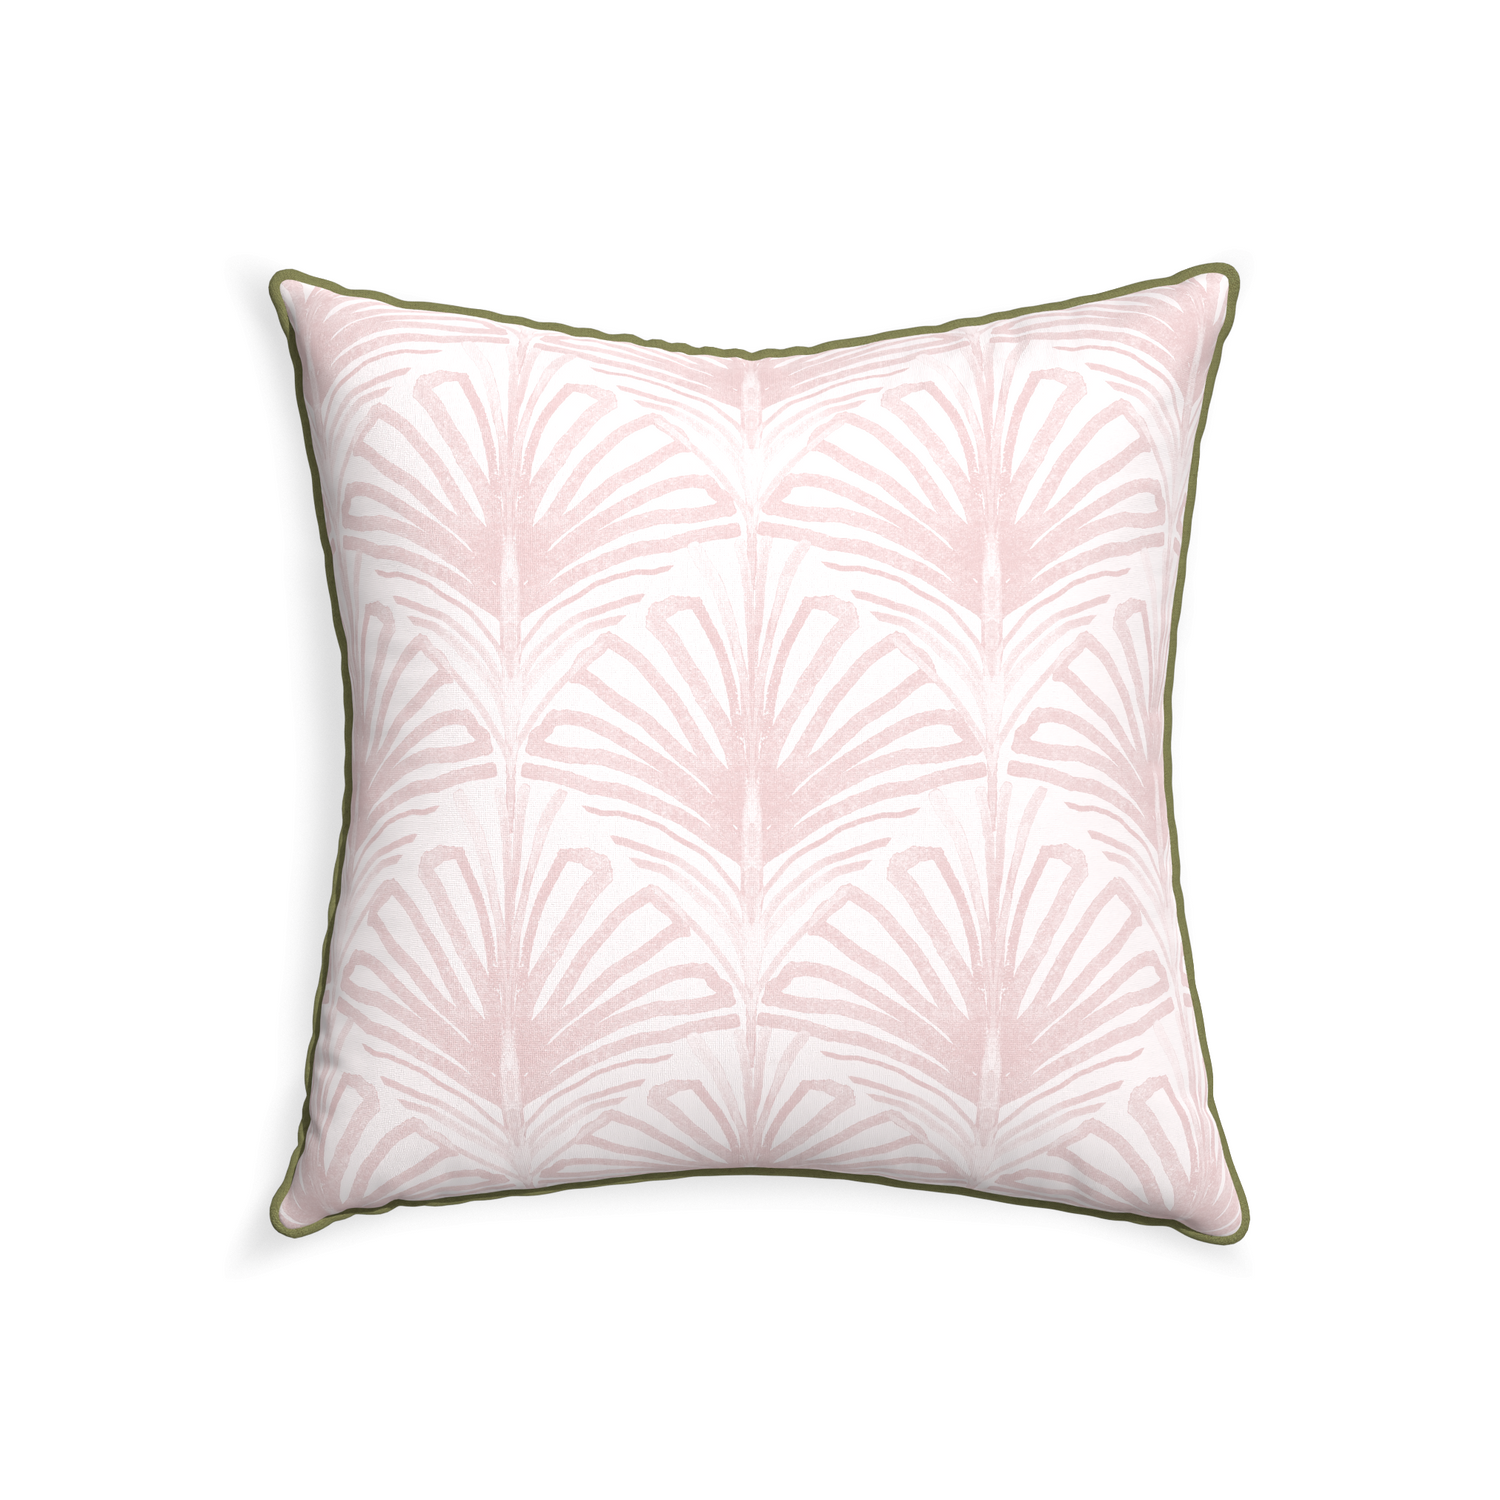 22-square suzy rose custom pillow with moss piping on white background